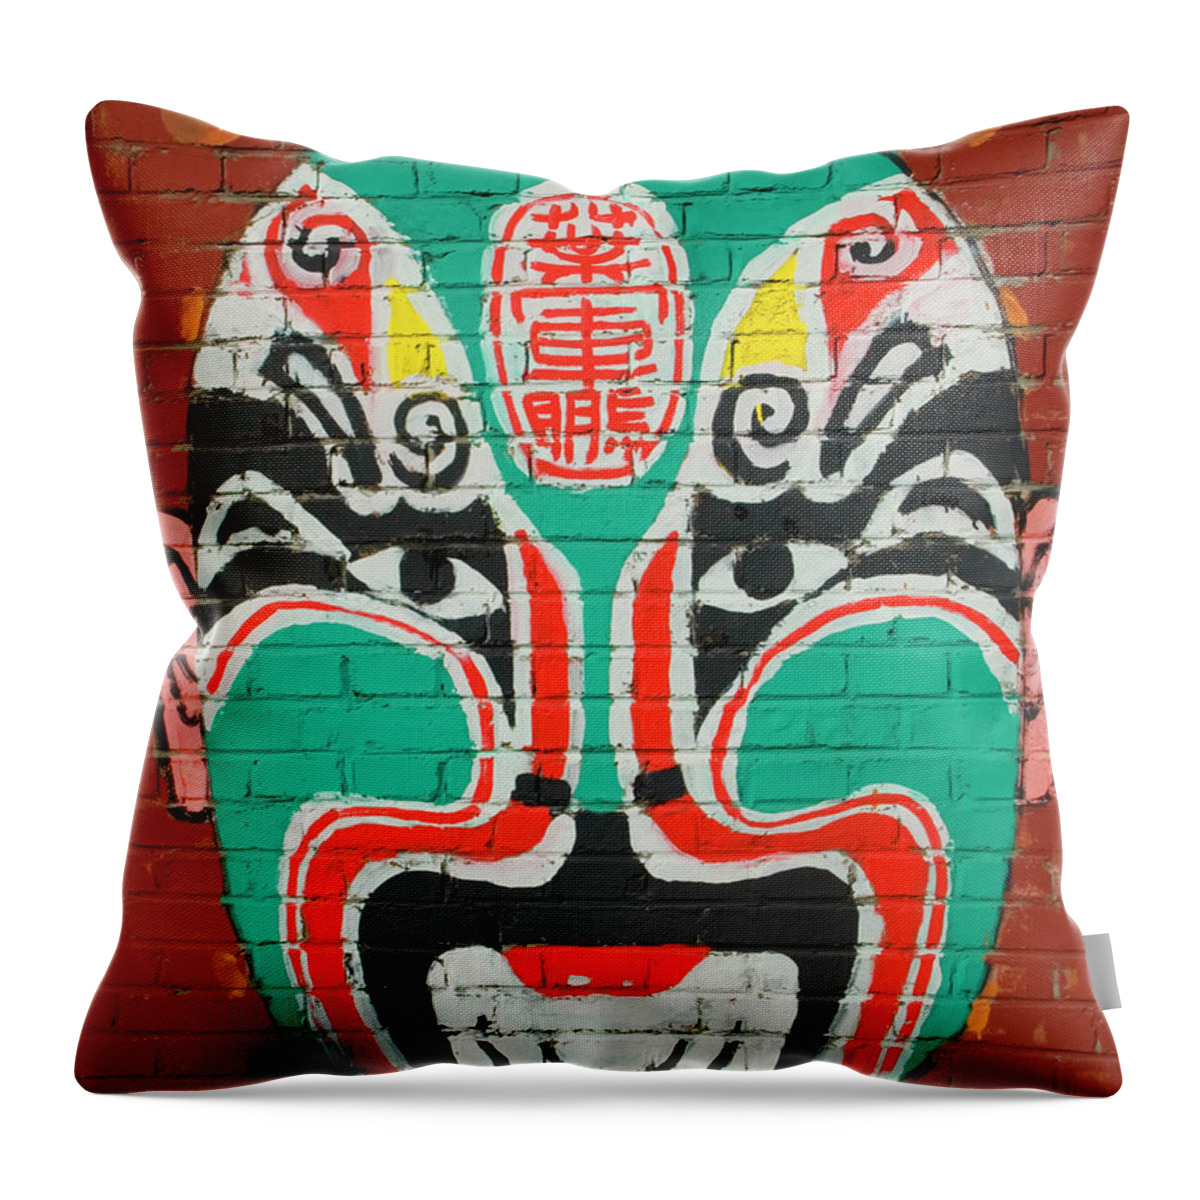  Throw Pillow featuring the photograph Opera Mask by R Thomas Berner